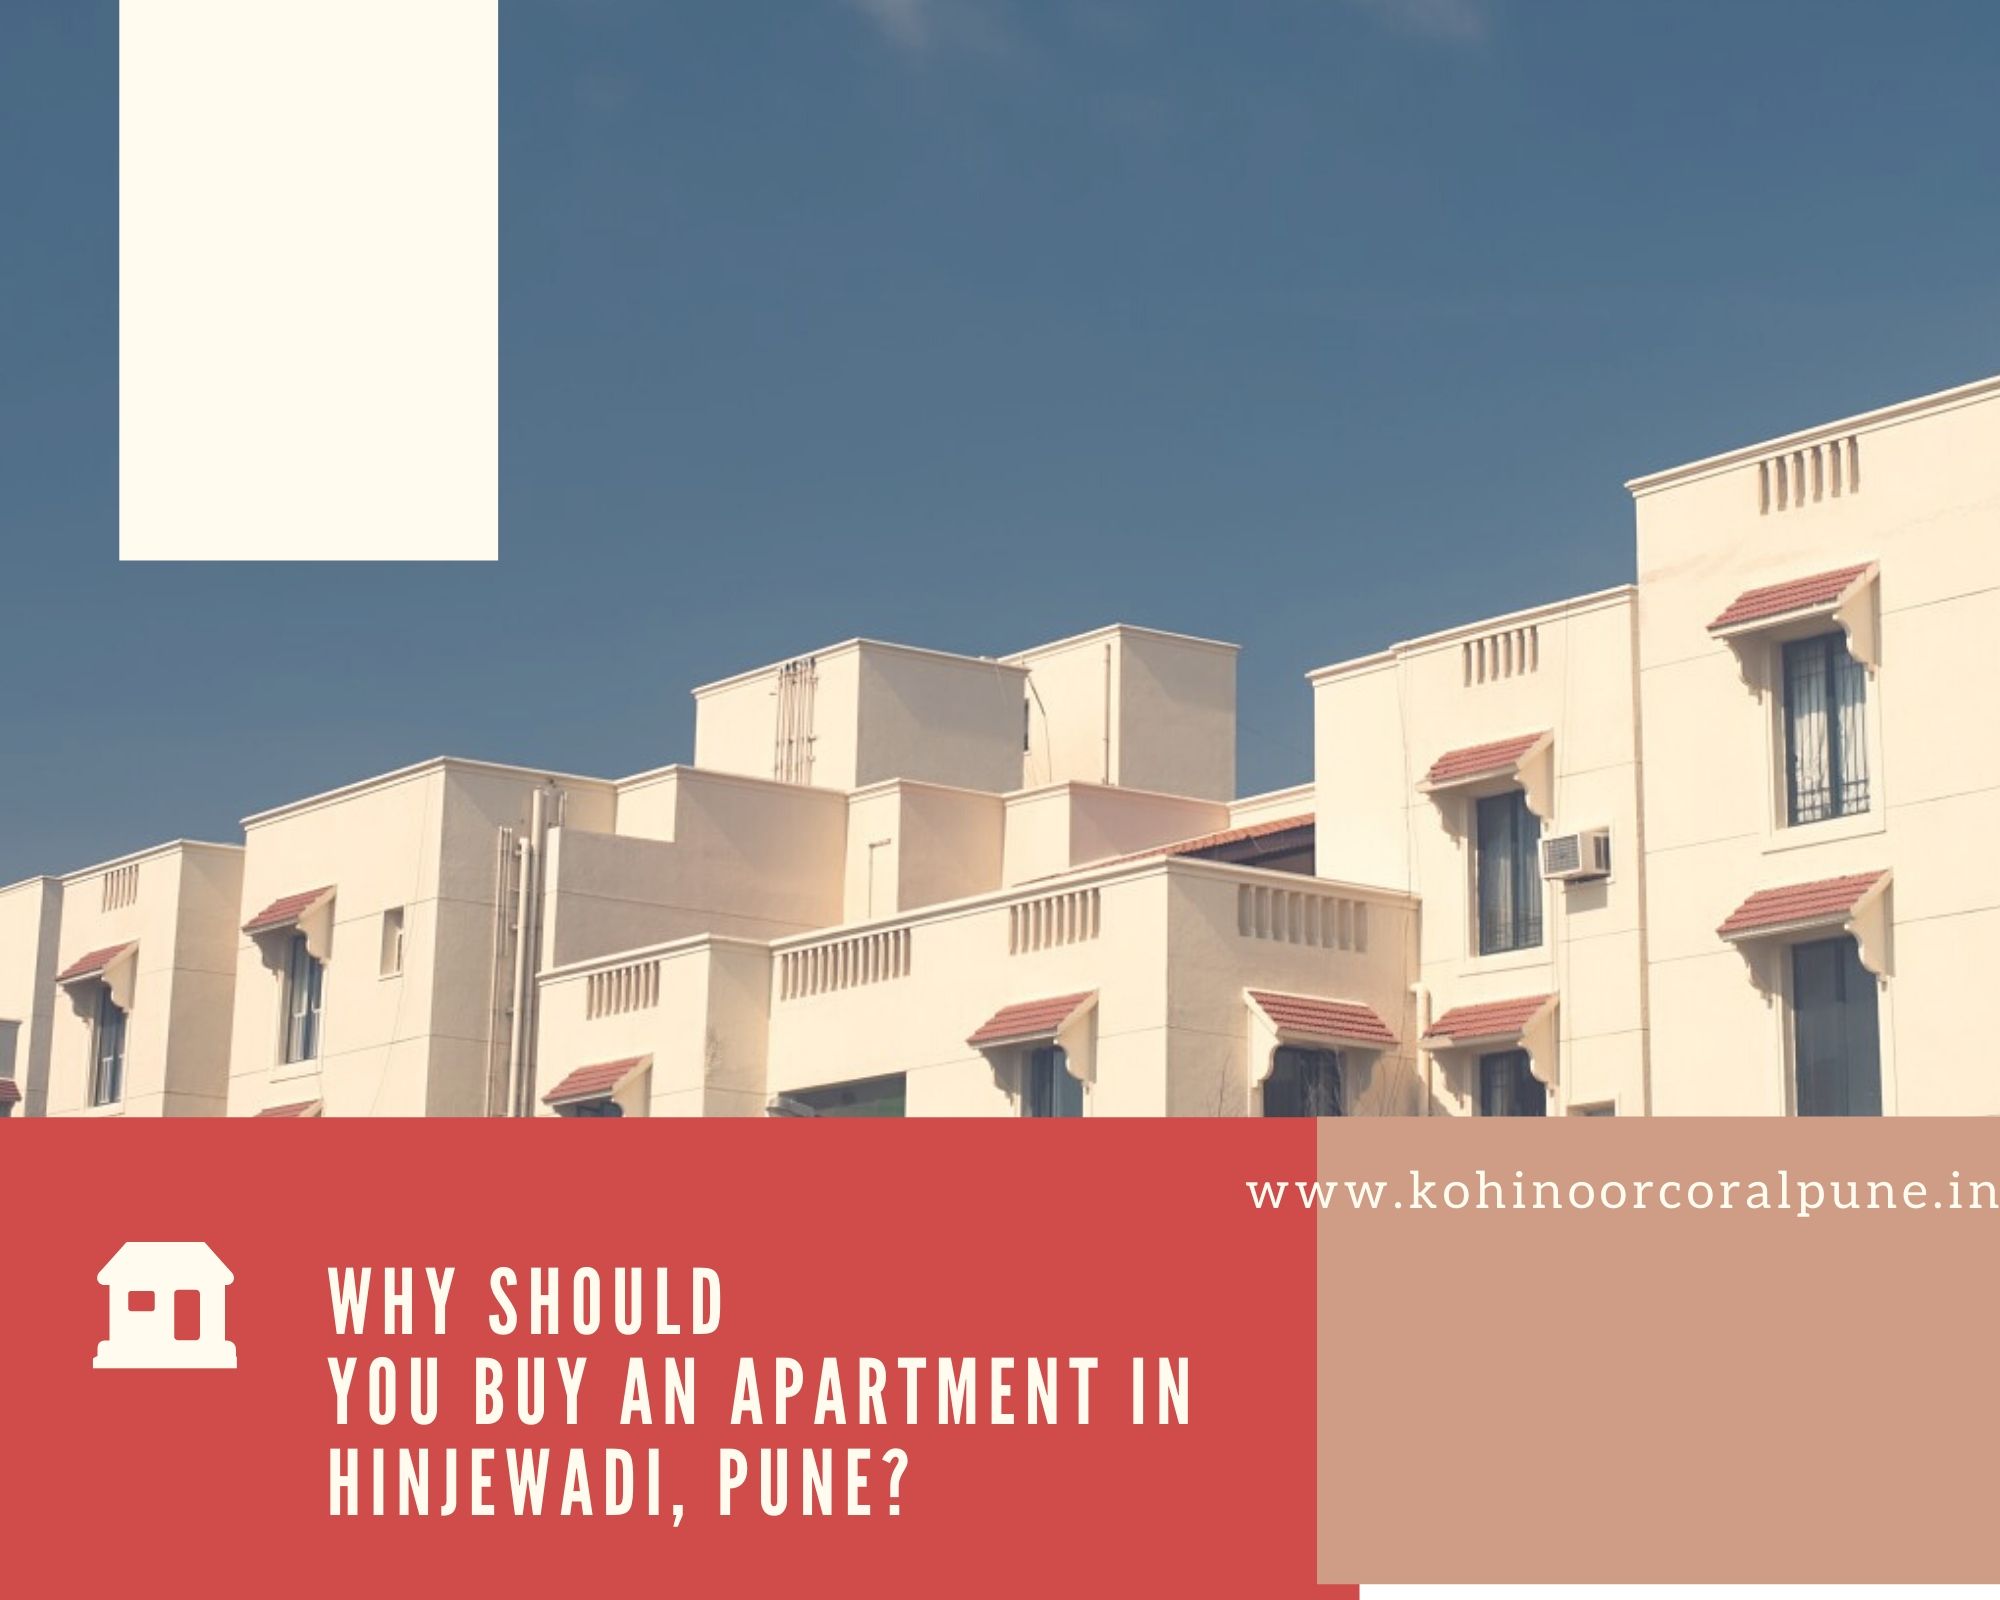 Why should you buy an apartment in Hinjewadi, Pune?